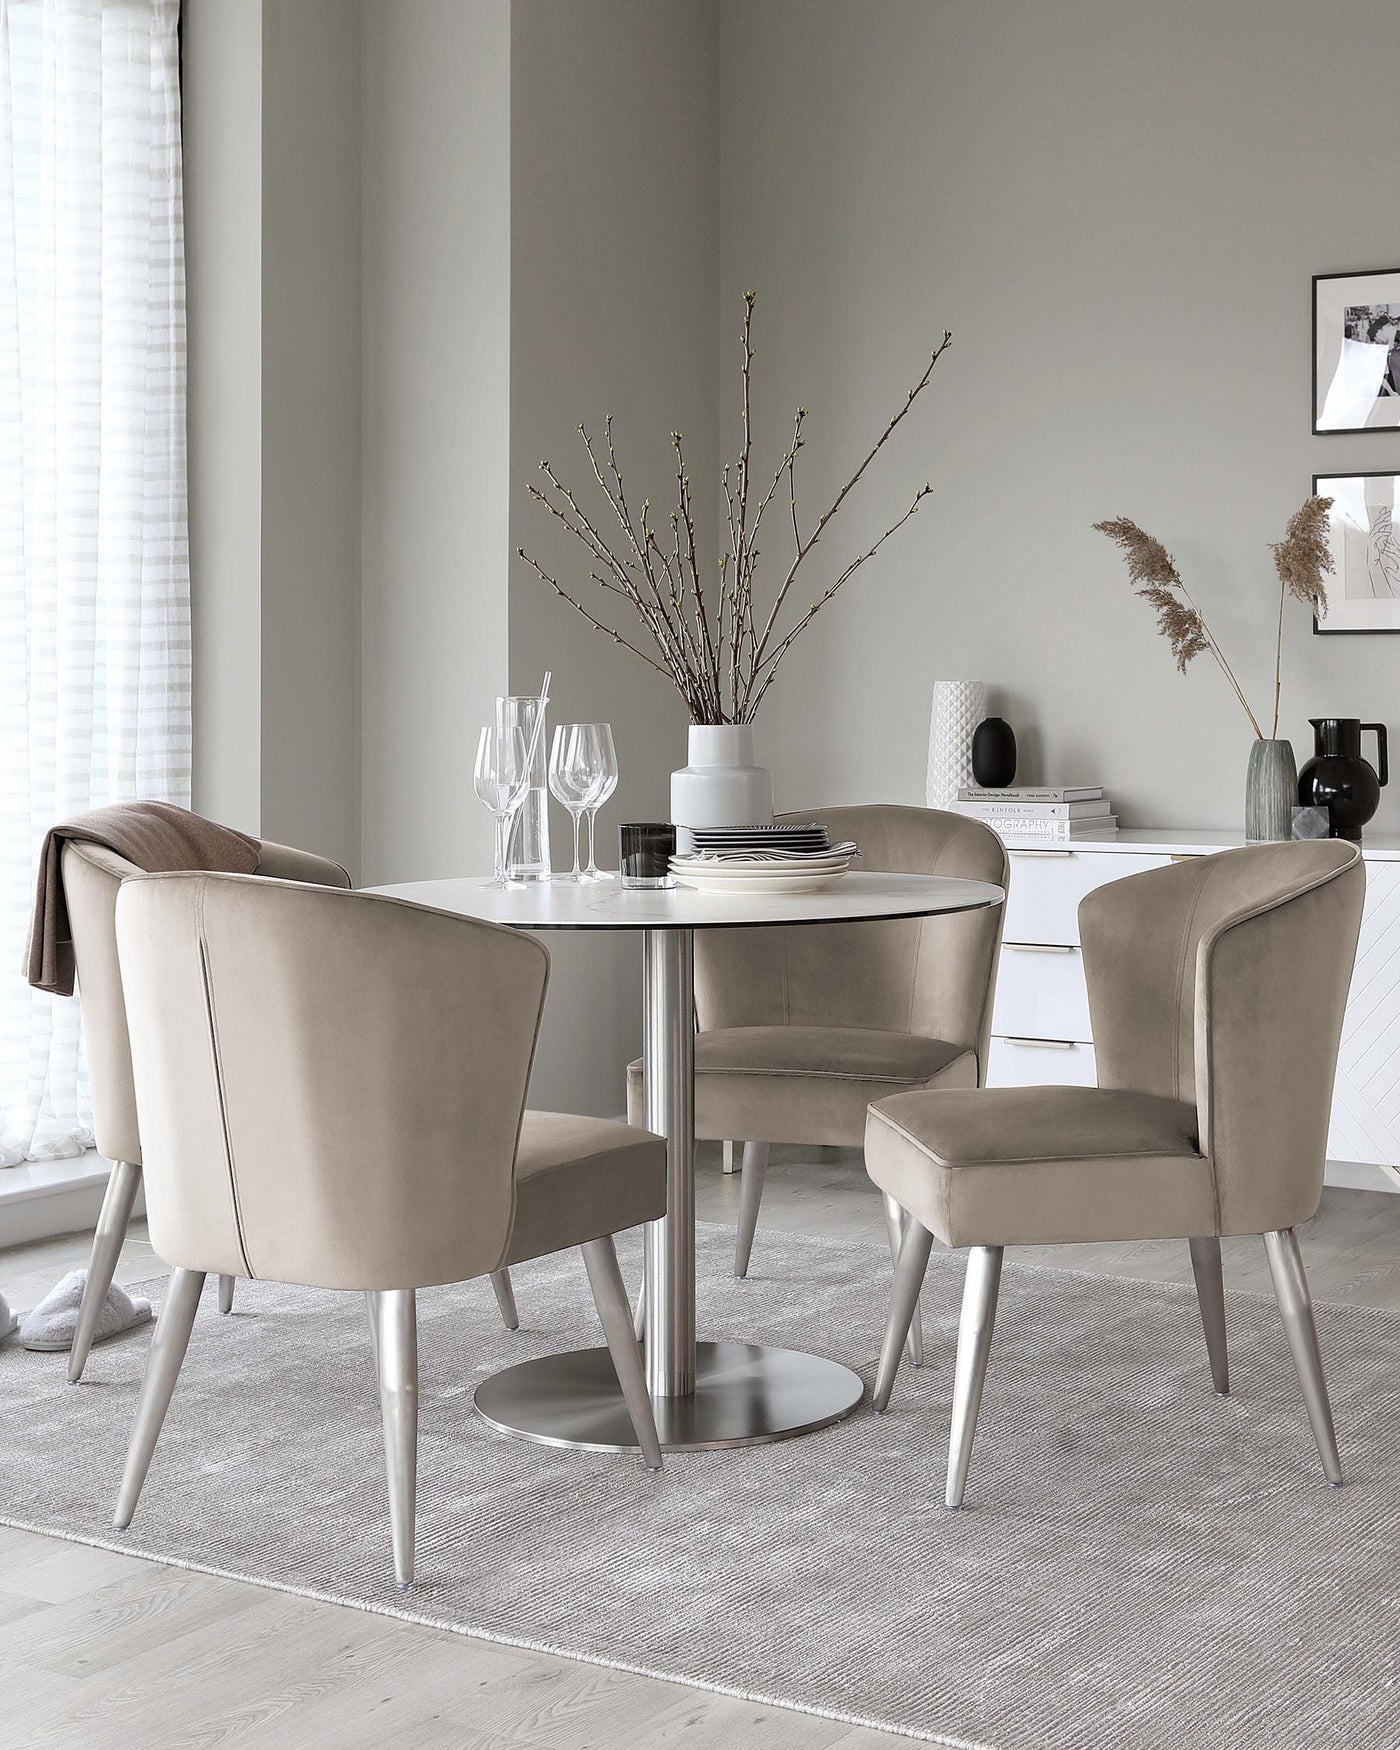 Round dining table with a reflective metal base and four matching upholstered chairs in a neutral tone on a textured grey rug.